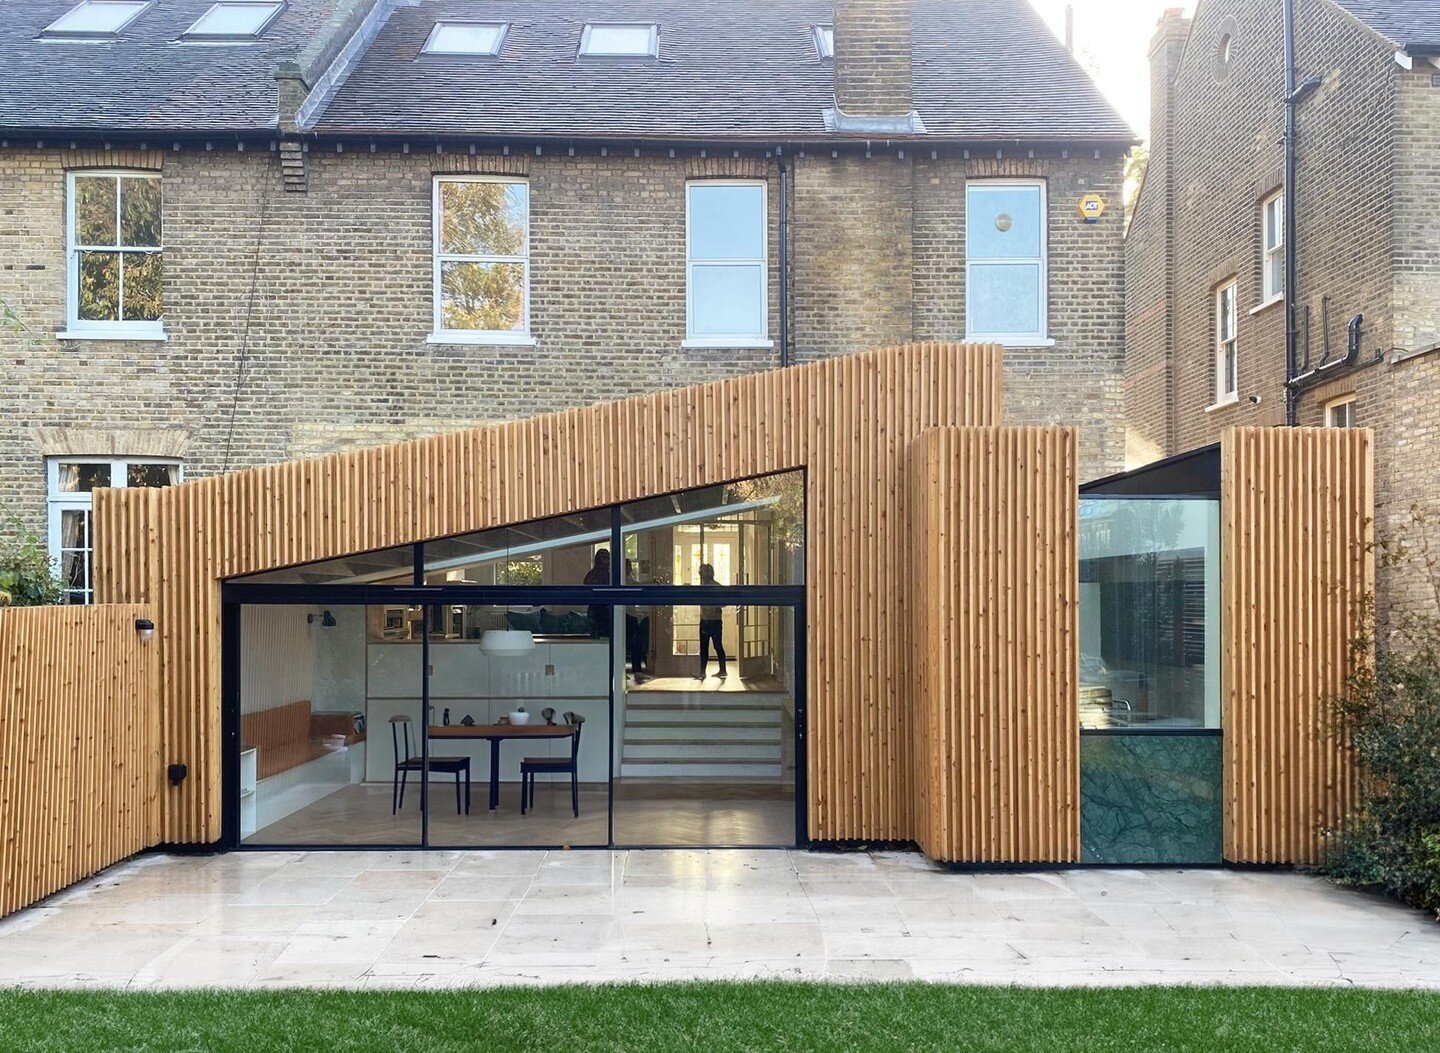 Our Hilly Fields project is a unique and highly bespoke extension, whole house refurbishment and loft conversion located within the Brockley Conservation Area. The new ground floor extension is a bold statement, taking reference from Scandinavia in t